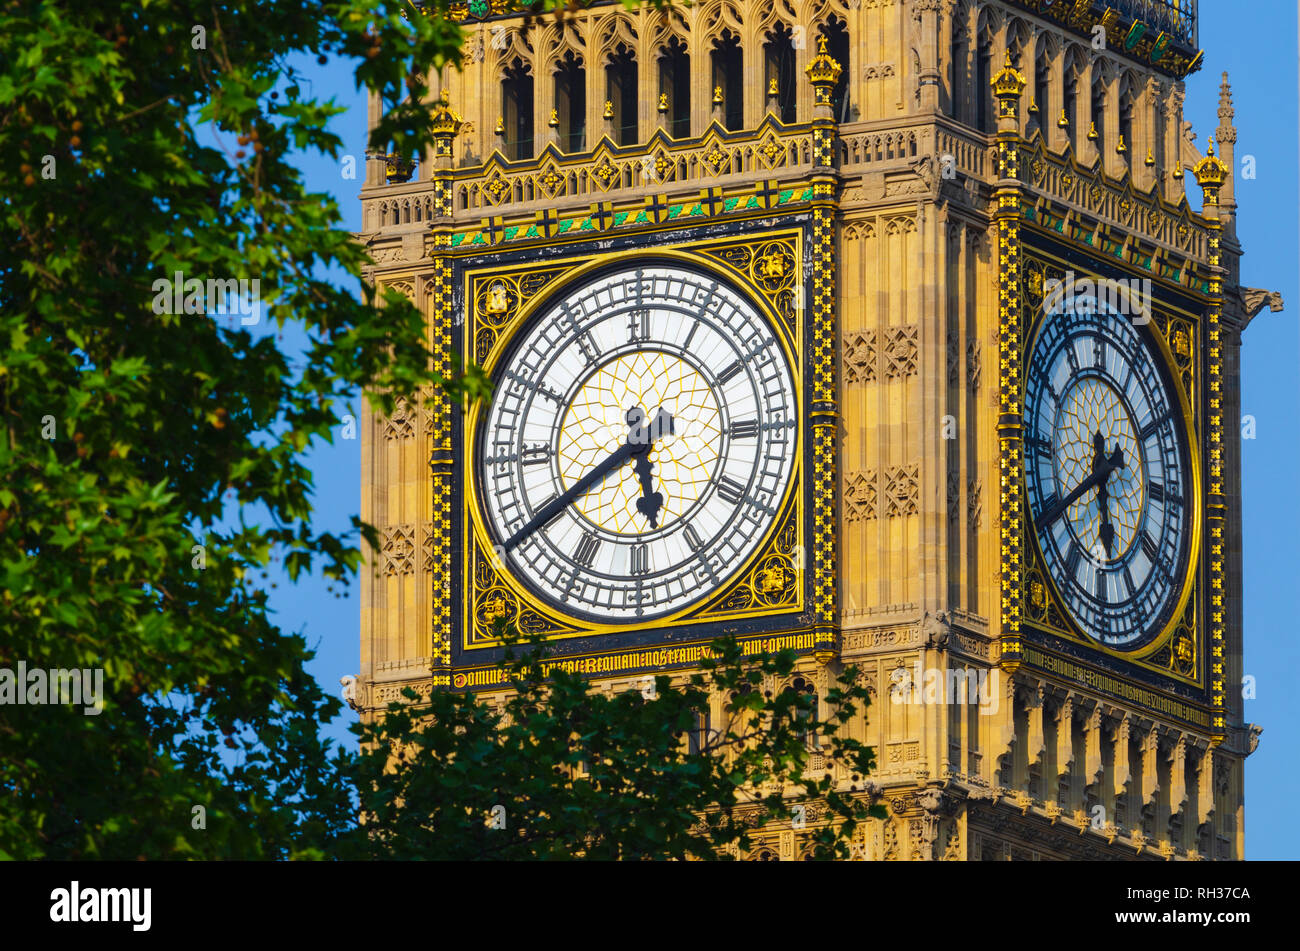 UK, England, London, Westminster, Palace of Westminster, Houses of Parliament, Big Ben Stock Photo